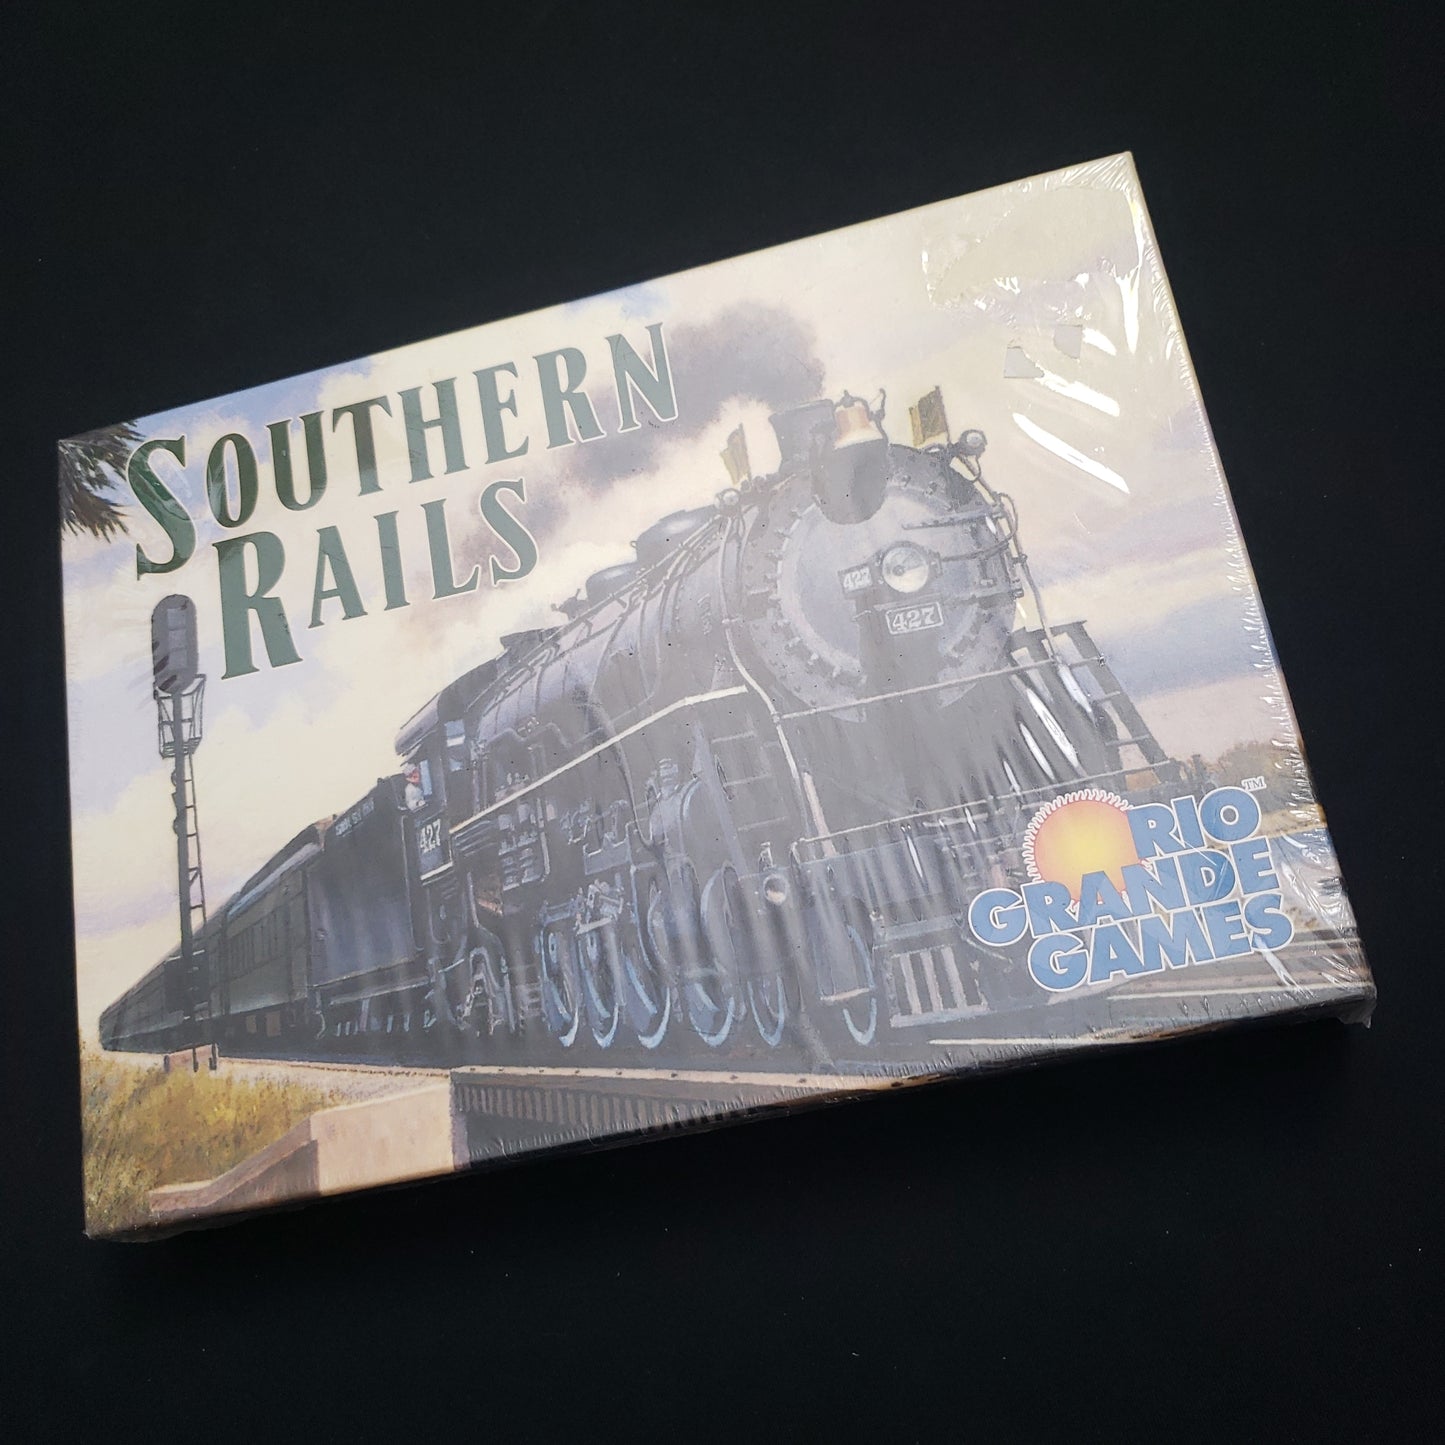 Image shows the front cover of the box of the Southern Rails board game